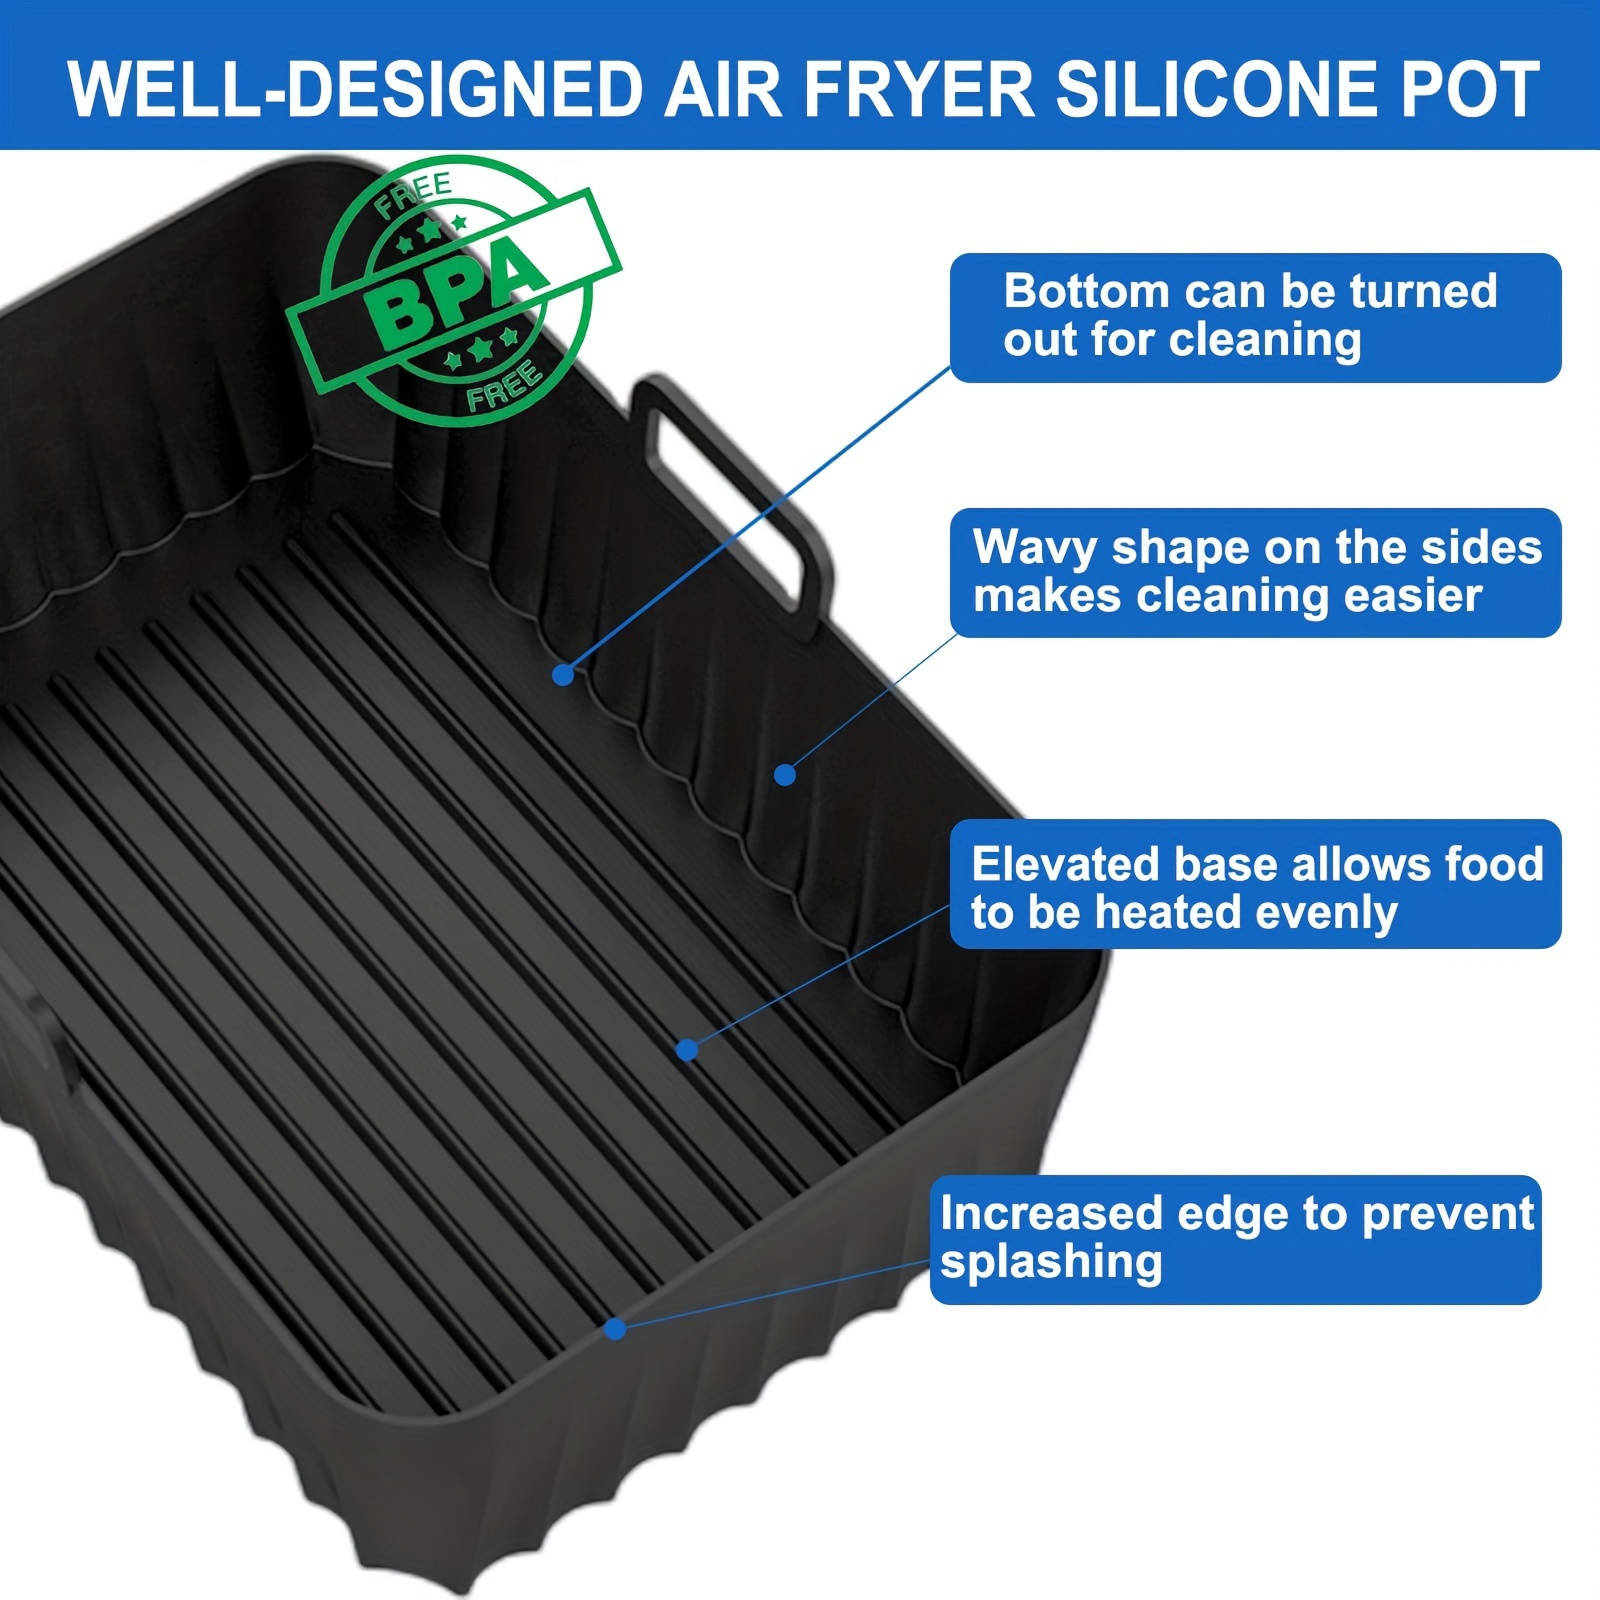 Silicone Air Fryer Liners For Ninja Dual Air Fryer Af400uk & Tower